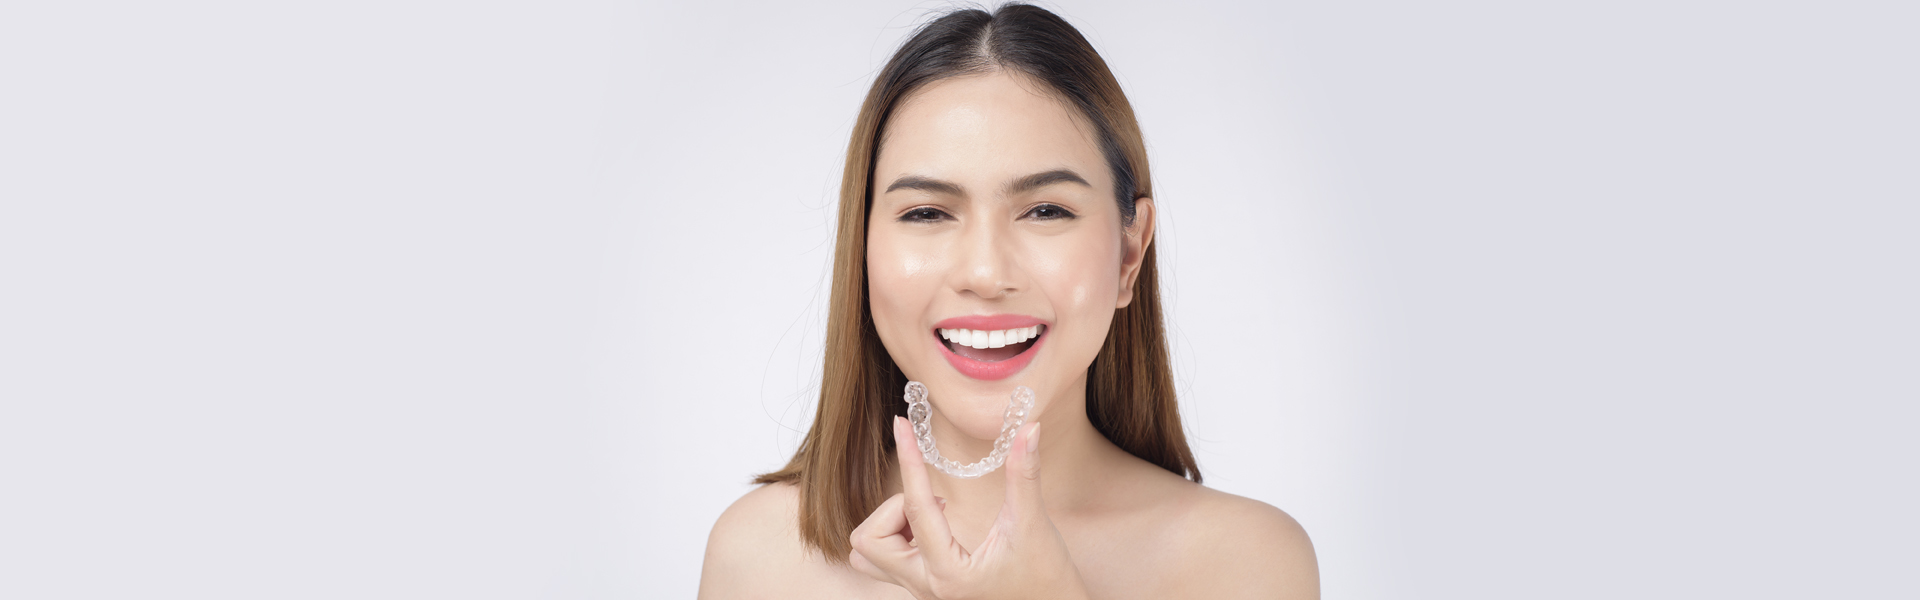 New Year, New You: 4 Reasons Why Invisalign Is The Way To Go